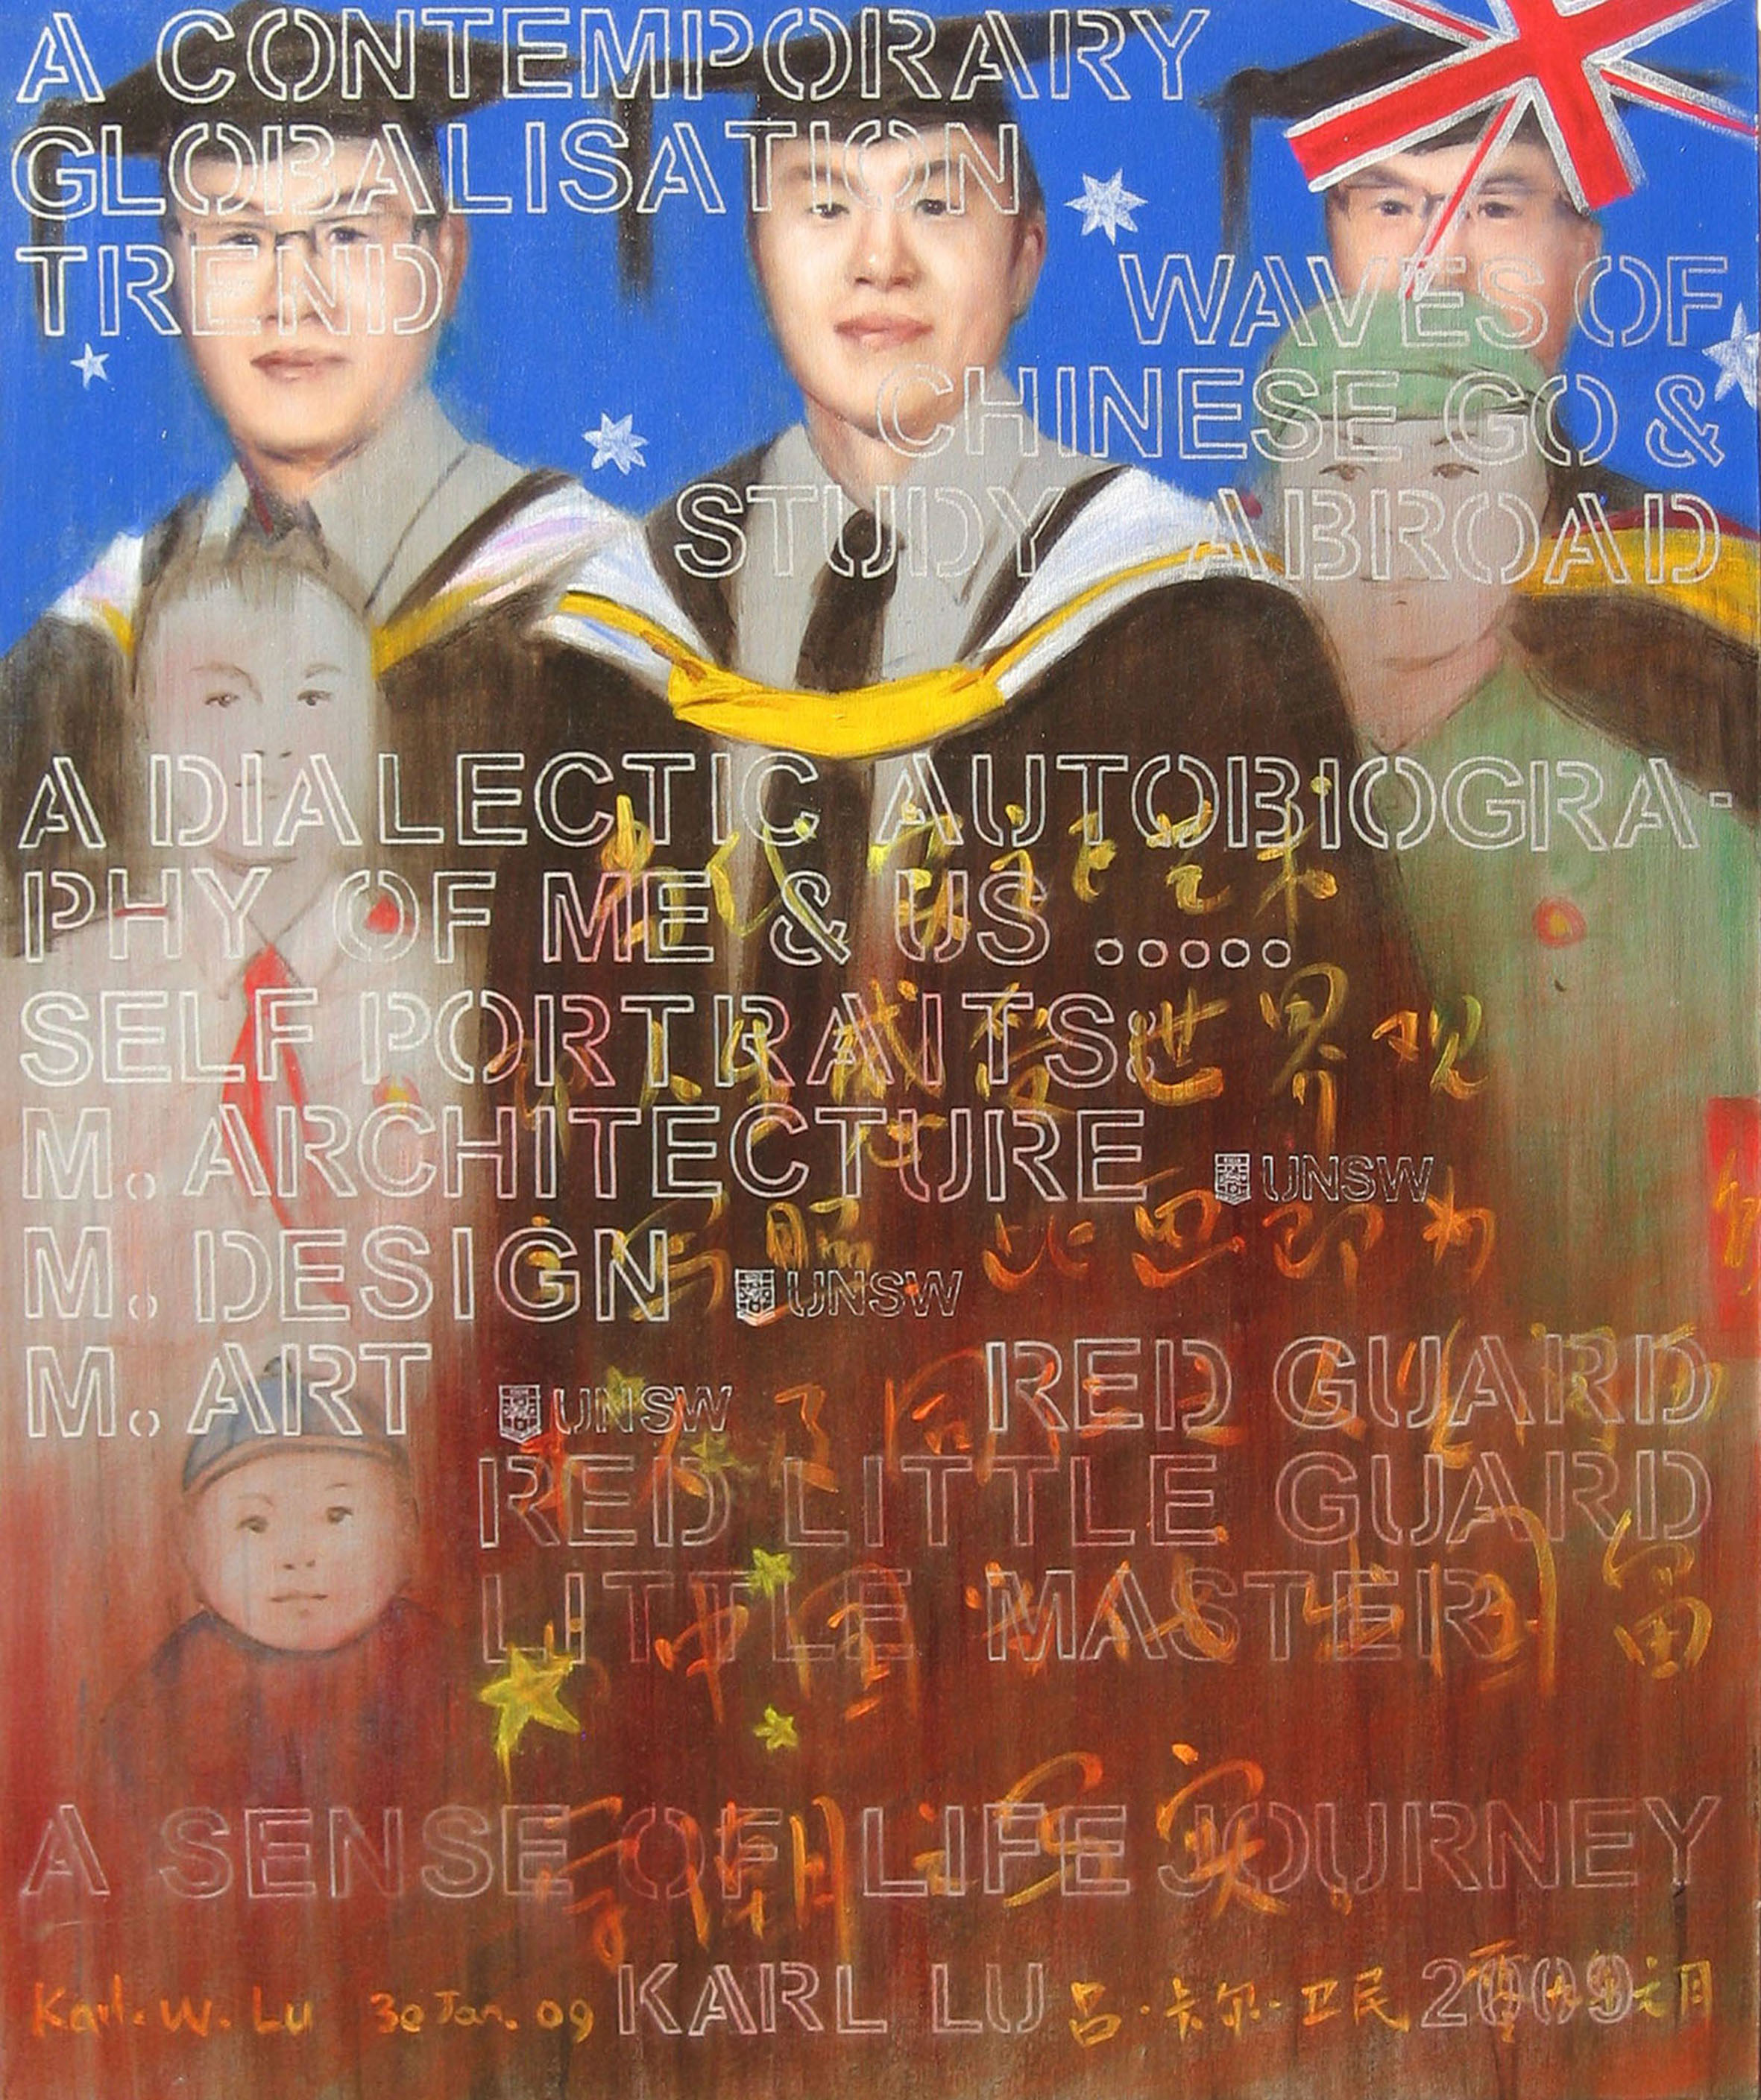  Dialectic Self-Portrait with Auto-biography &amp; Triple Masters (Positive Global Life Series 2008-09) 